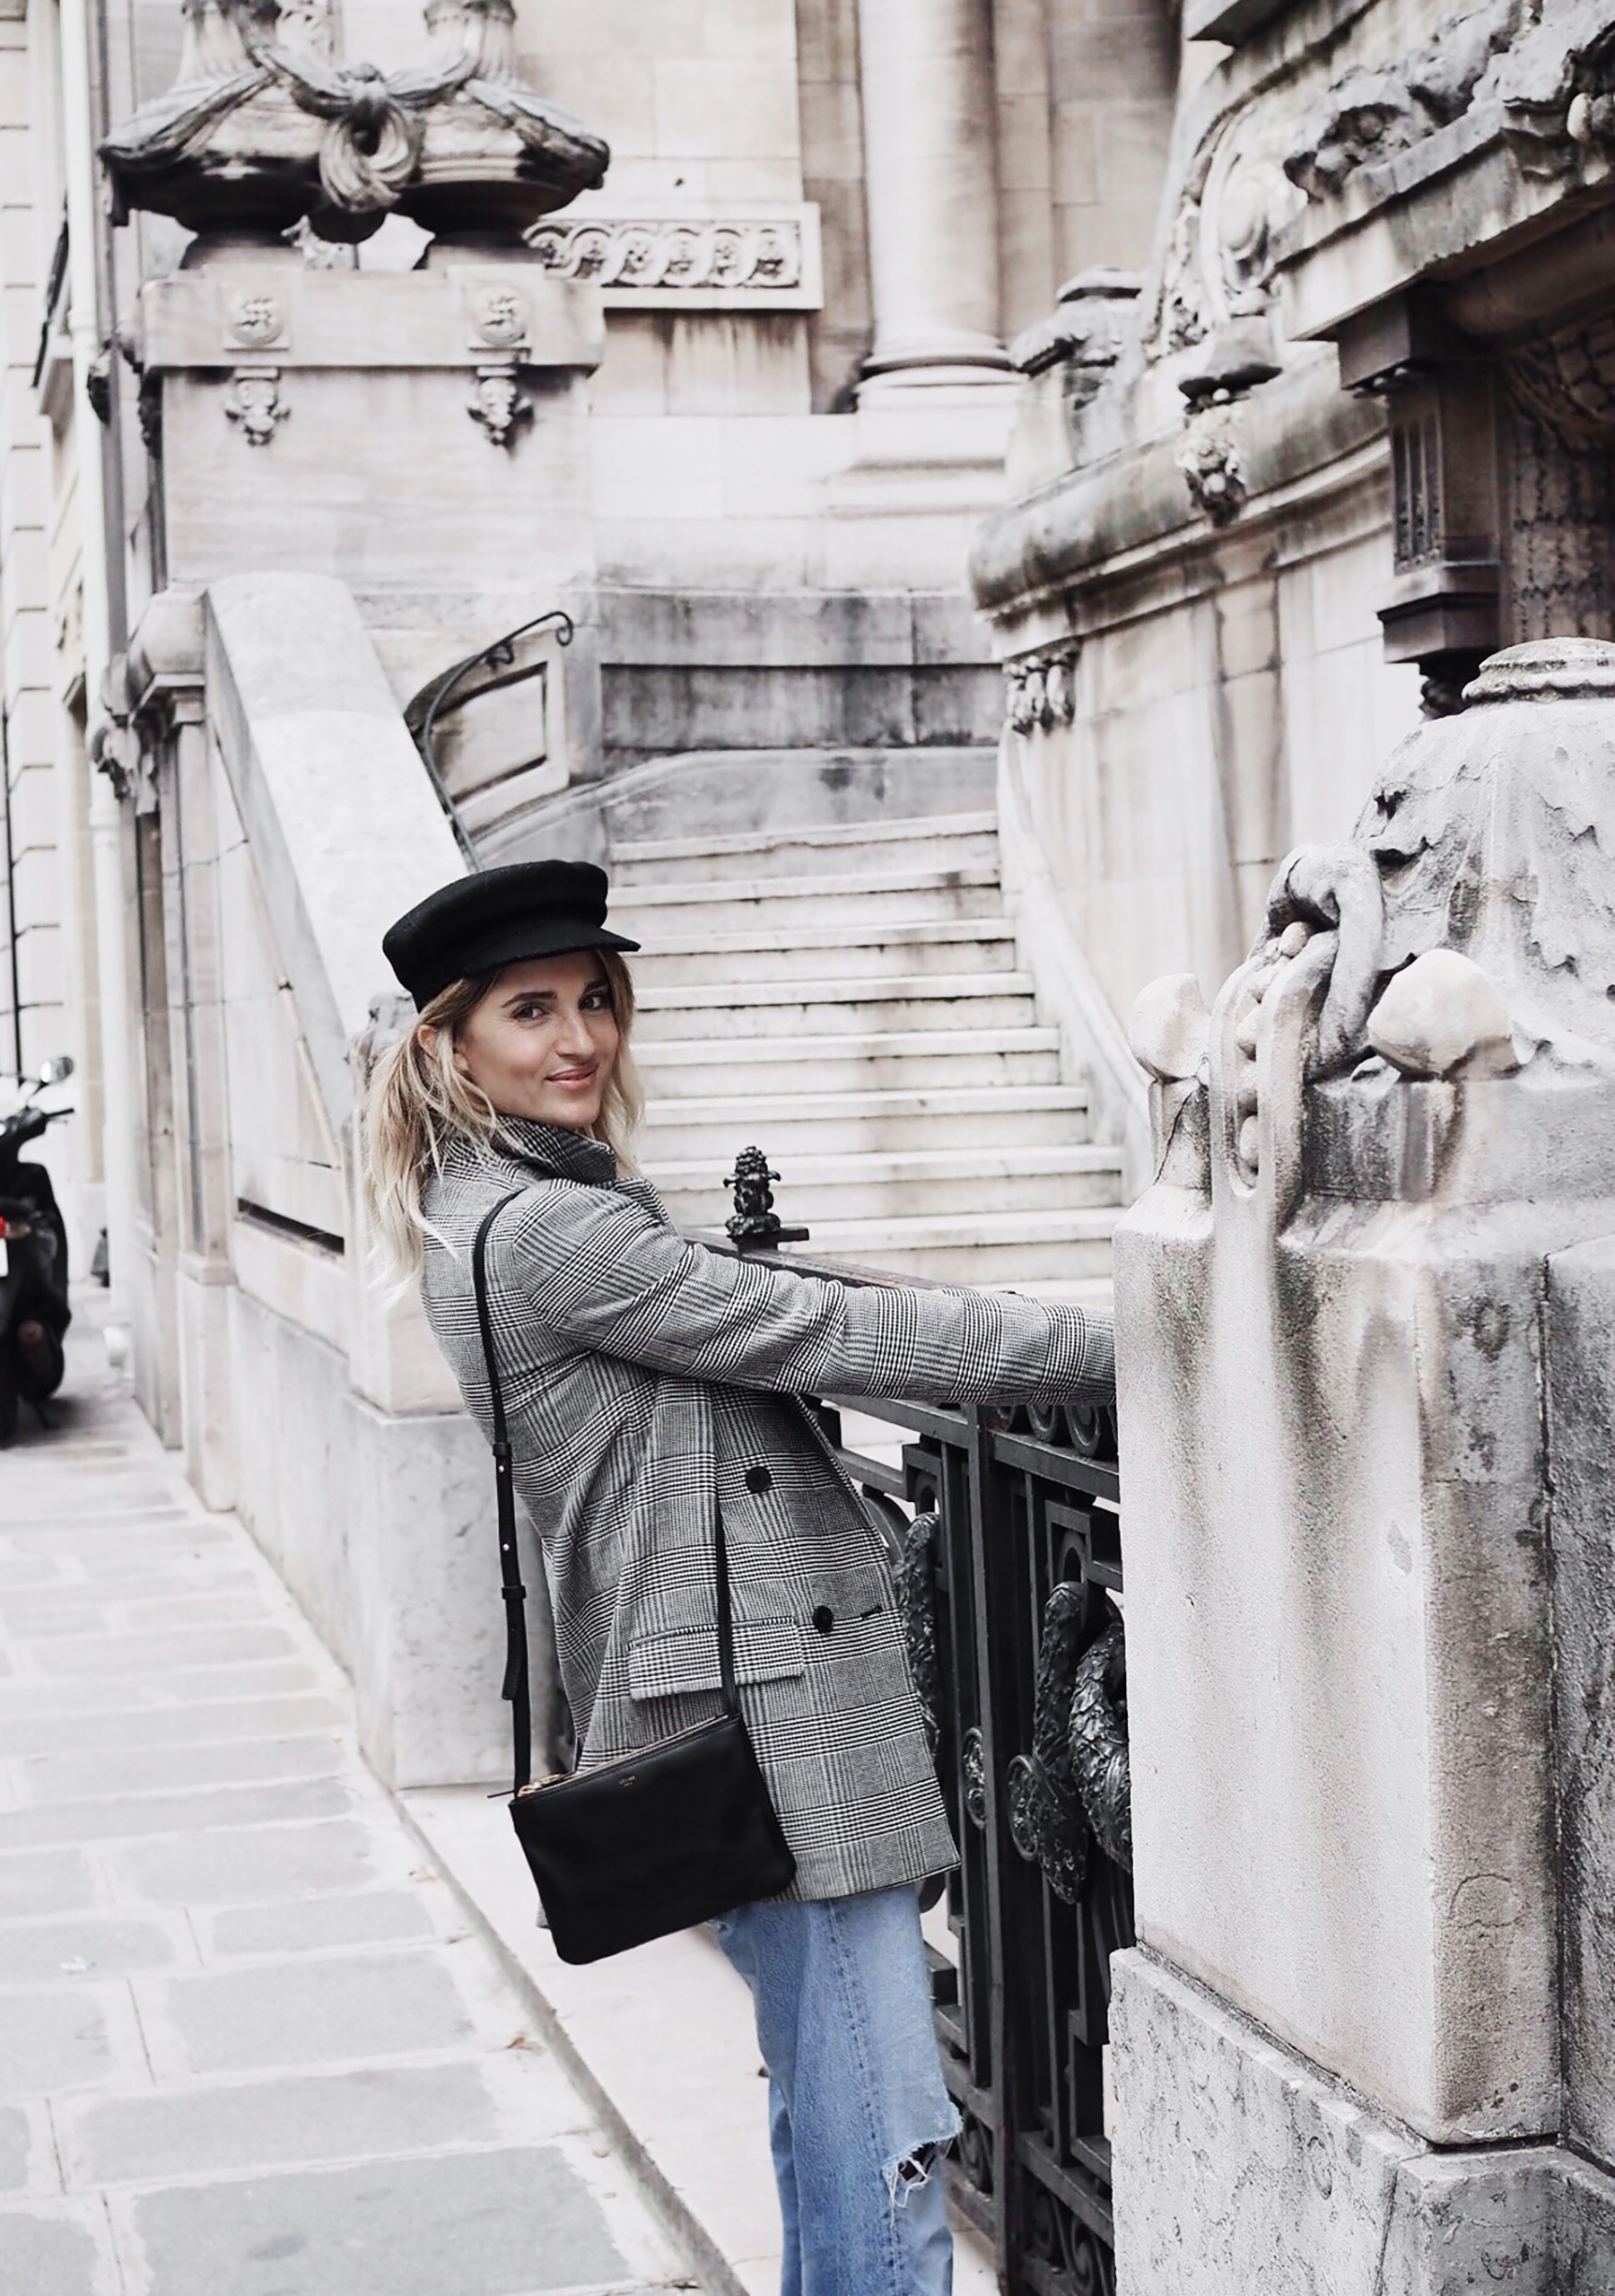 Steal Her Style: Baker Boy Hat | Love Daily Dose